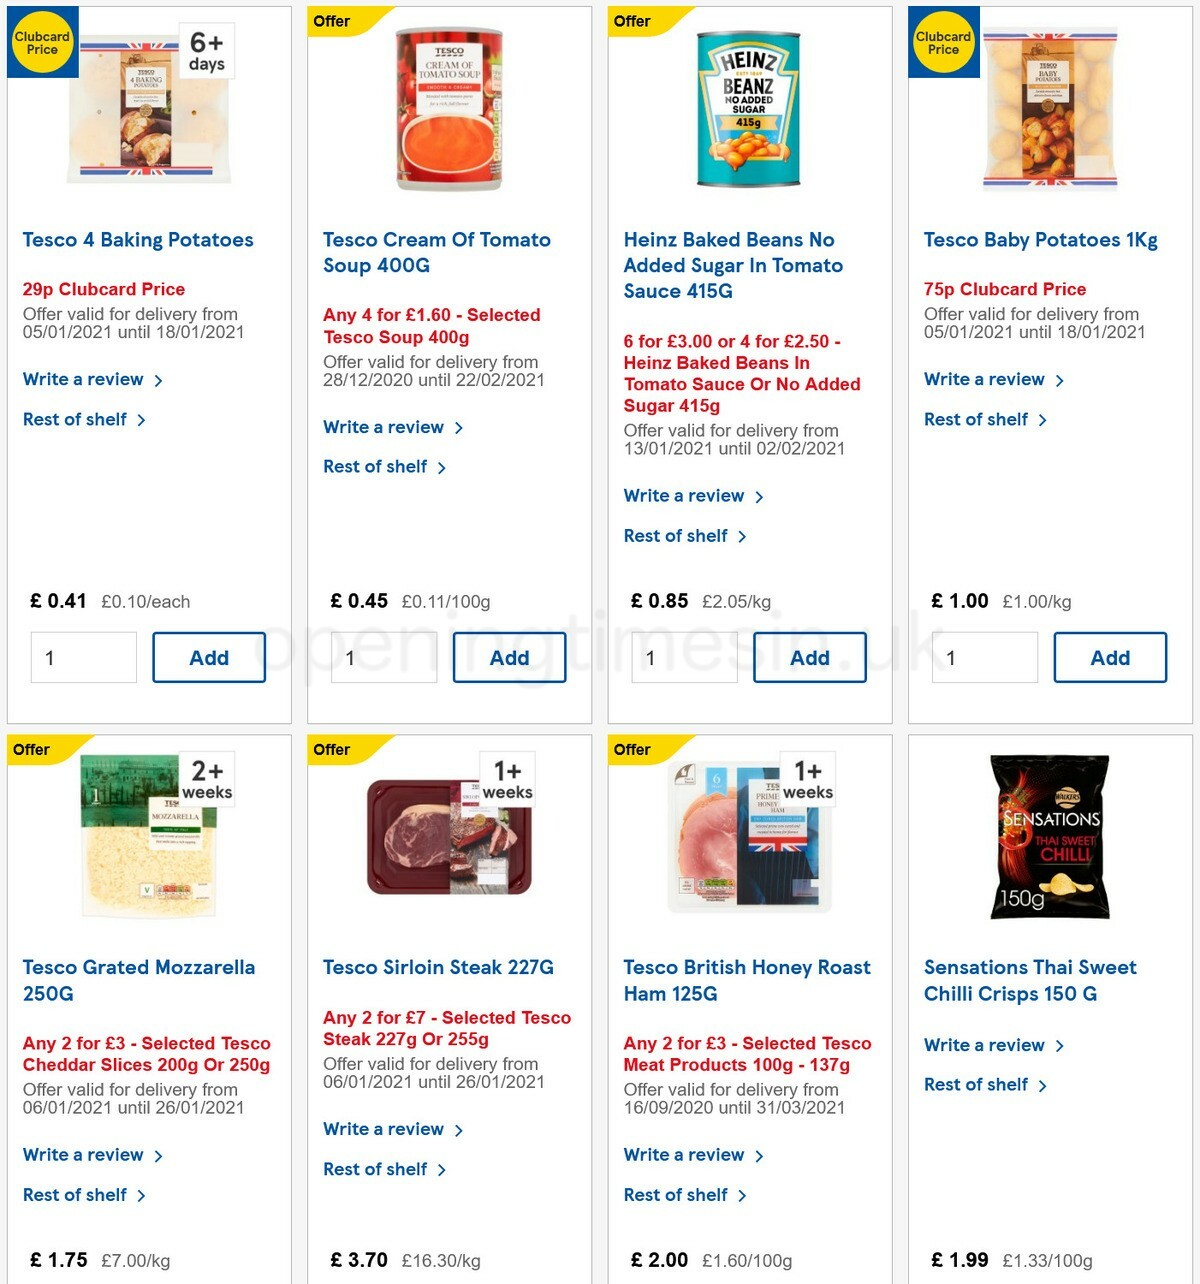 TESCO Offers from 13 January